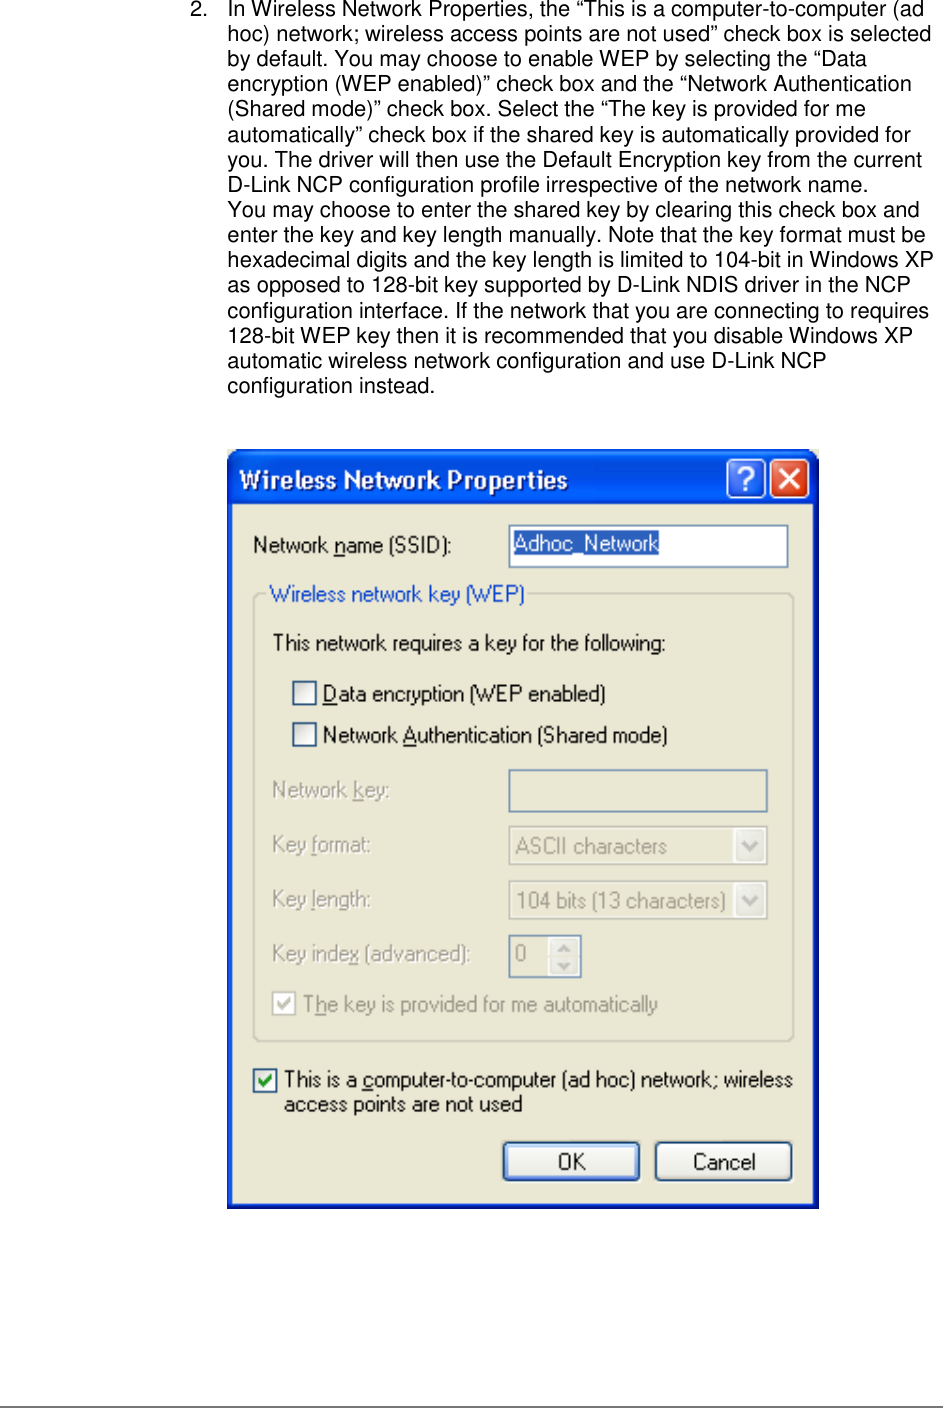 2.  In Wireless Network Properties, the “This is a computer-to-computer (adhoc) network; wireless access points are not used” check box is selectedby default. You may choose to enable WEP by selecting the “Dataencryption (WEP enabled)” check box and the “Network Authentication(Shared mode)” check box. Select the “The key is provided for meautomatically” check box if the shared key is automatically provided foryou. The driver will then use the Default Encryption key from the currentD-Link NCP configuration profile irrespective of the network name.You may choose to enter the shared key by clearing this check box andenter the key and key length manually. Note that the key format must behexadecimal digits and the key length is limited to 104-bit in Windows XPas opposed to 128-bit key supported by D-Link NDIS driver in the NCPconfiguration interface. If the network that you are connecting to requires128-bit WEP key then it is recommended that you disable Windows XPautomatic wireless network configuration and use D-Link NCPconfiguration instead.